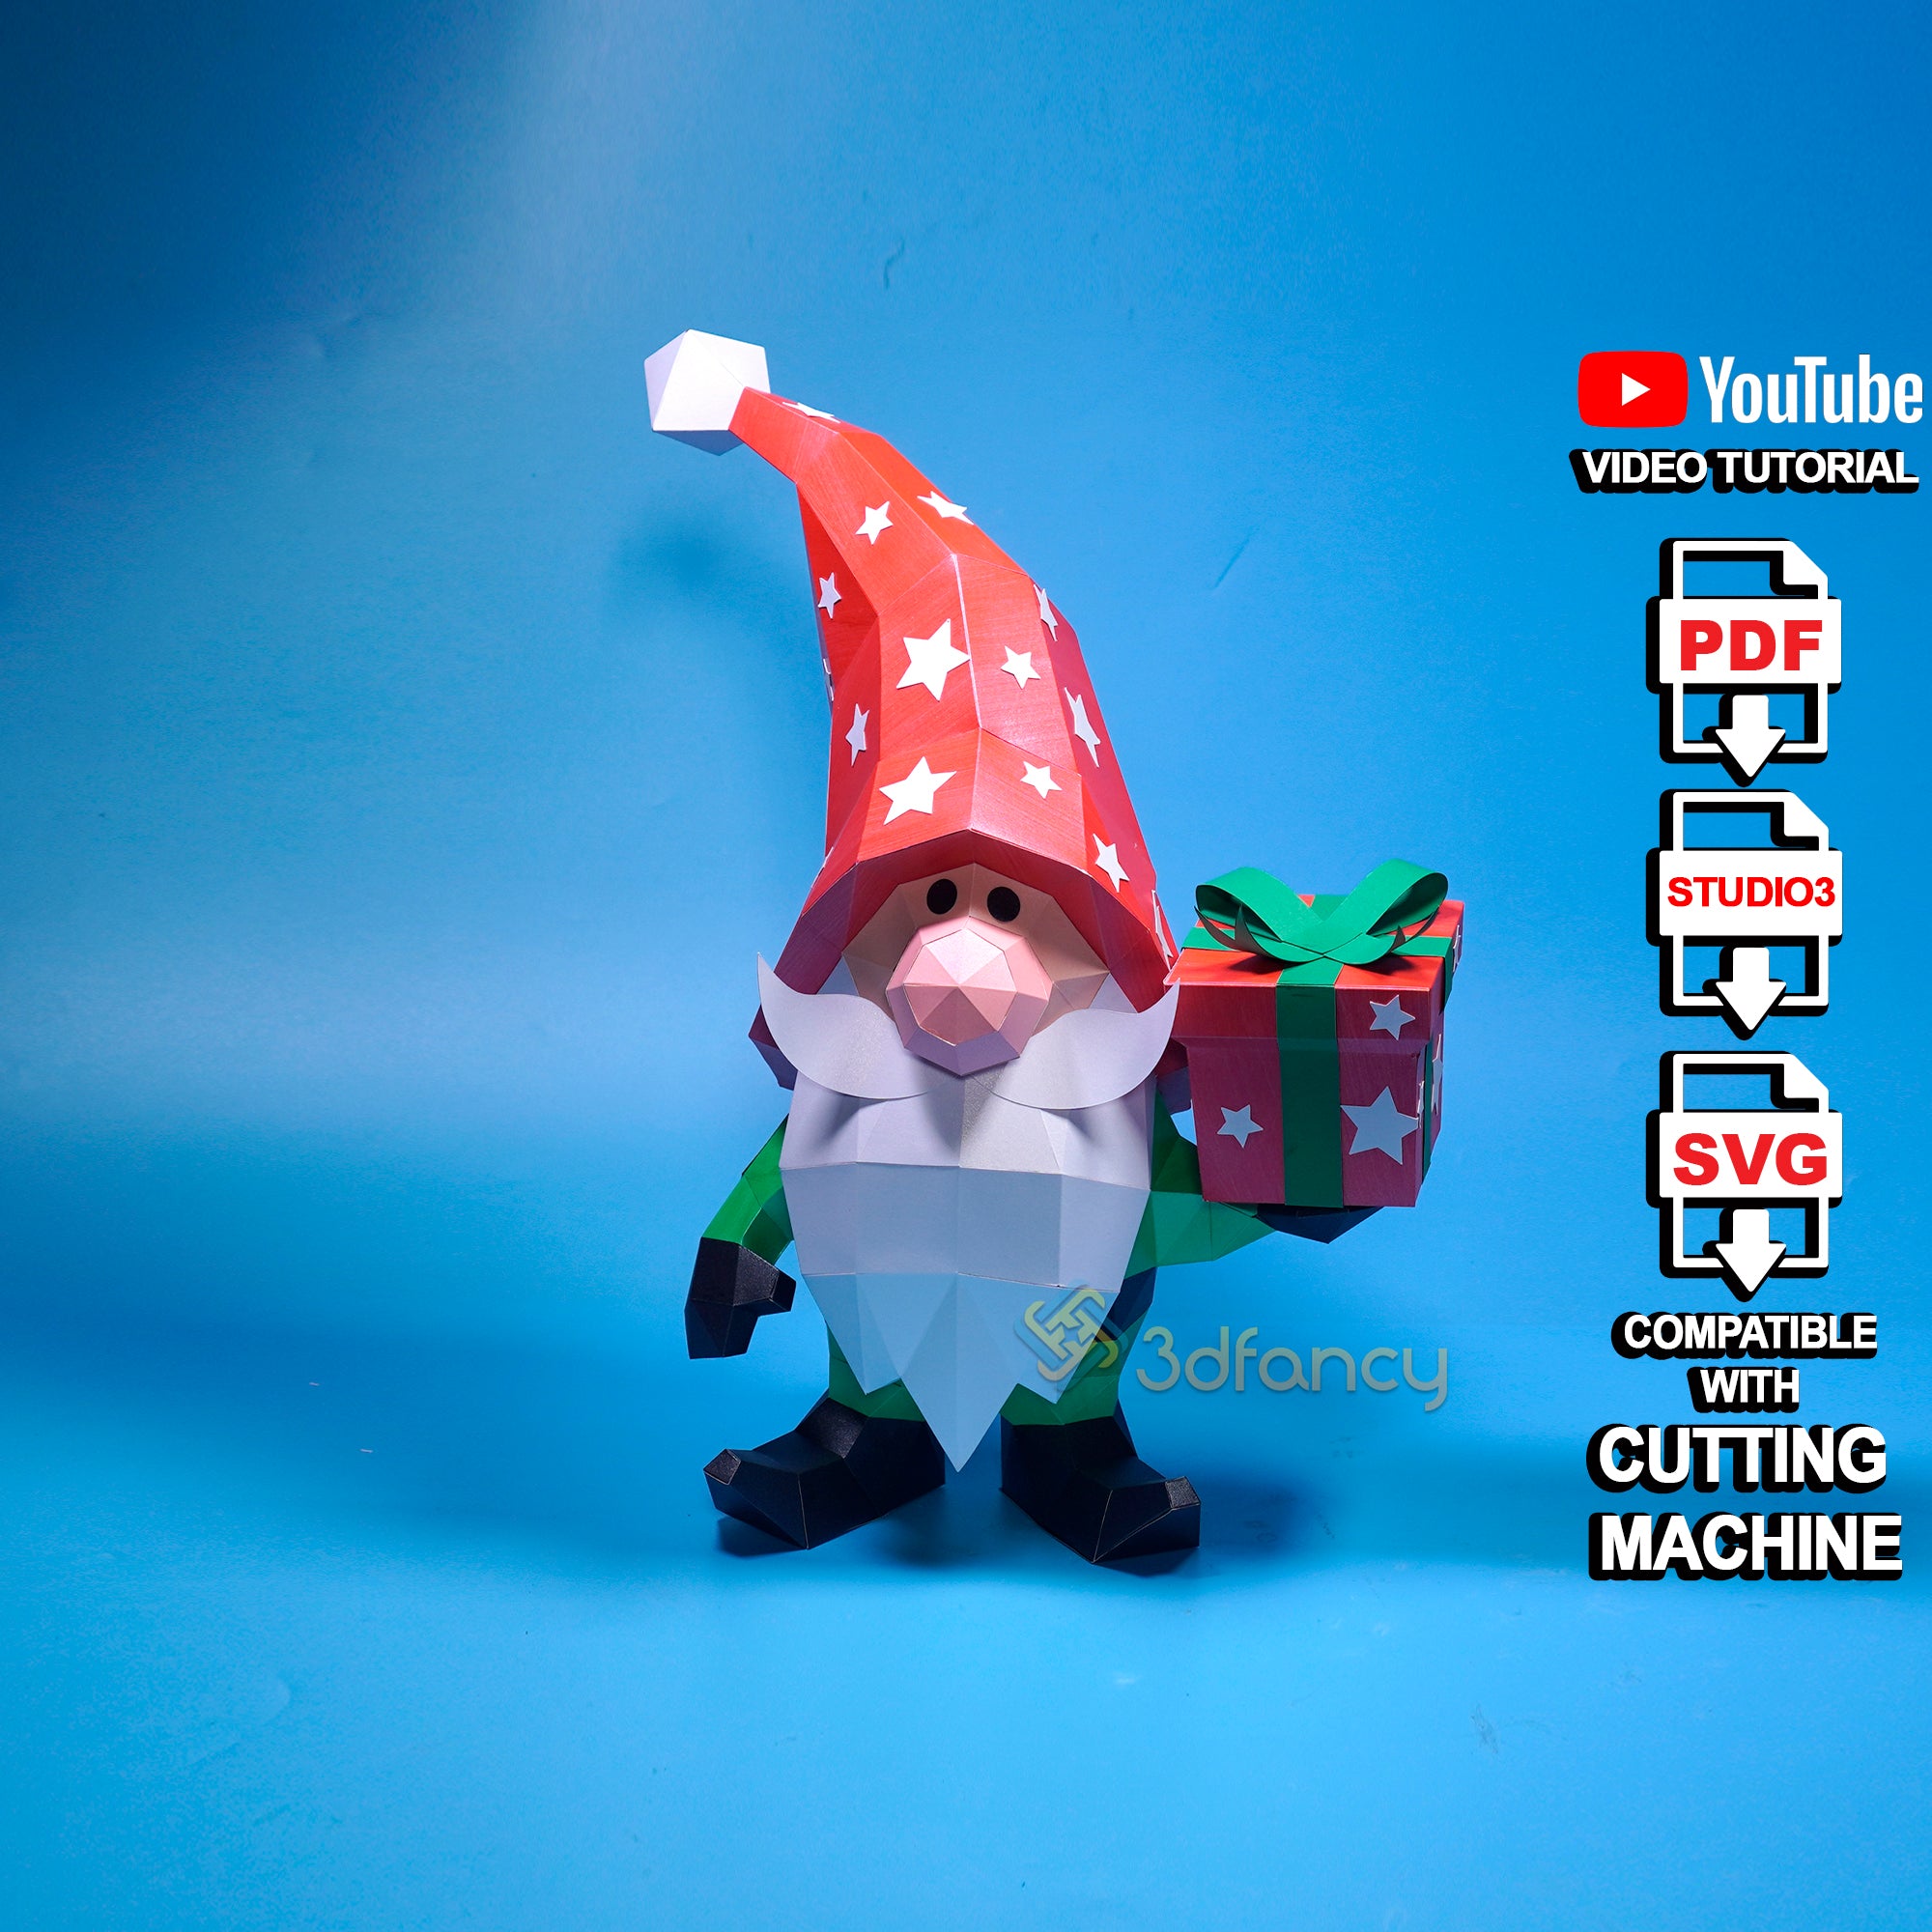 Gnome Papercraft 3D PDF, SVG Templates for Cricut Projects - DIY Low Poly Gnome and Christmas Gnome 3D for Christmas Decorations